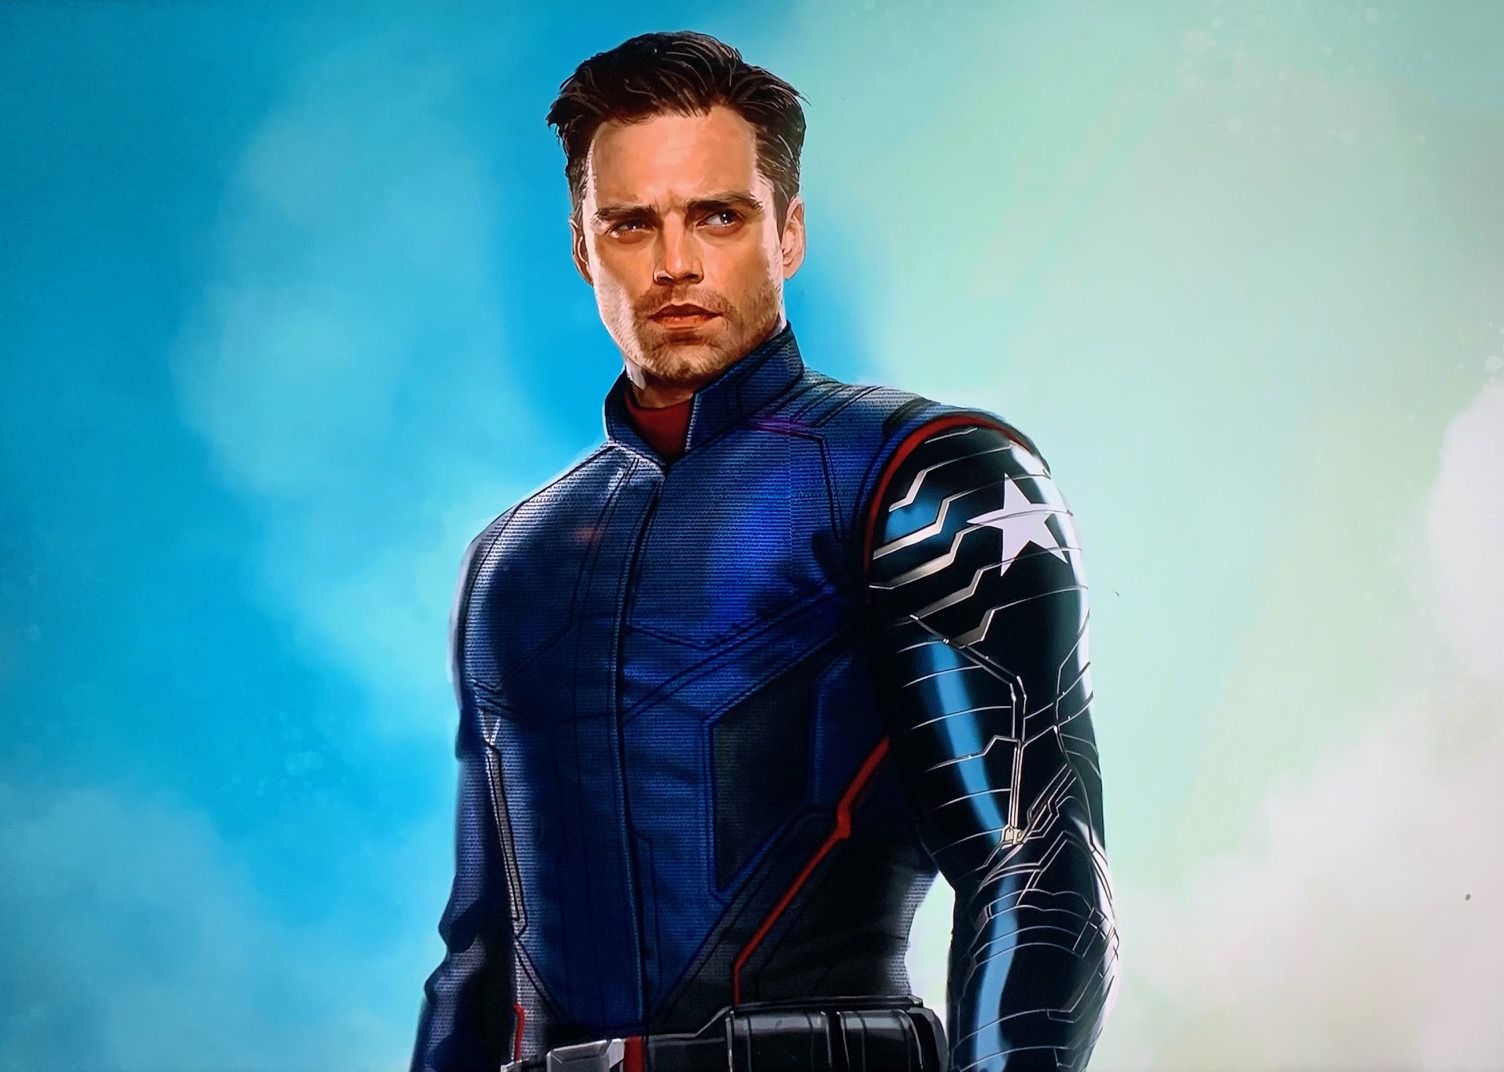 Check out these costume designs for Disney's Falcon and the Winter Soldier!